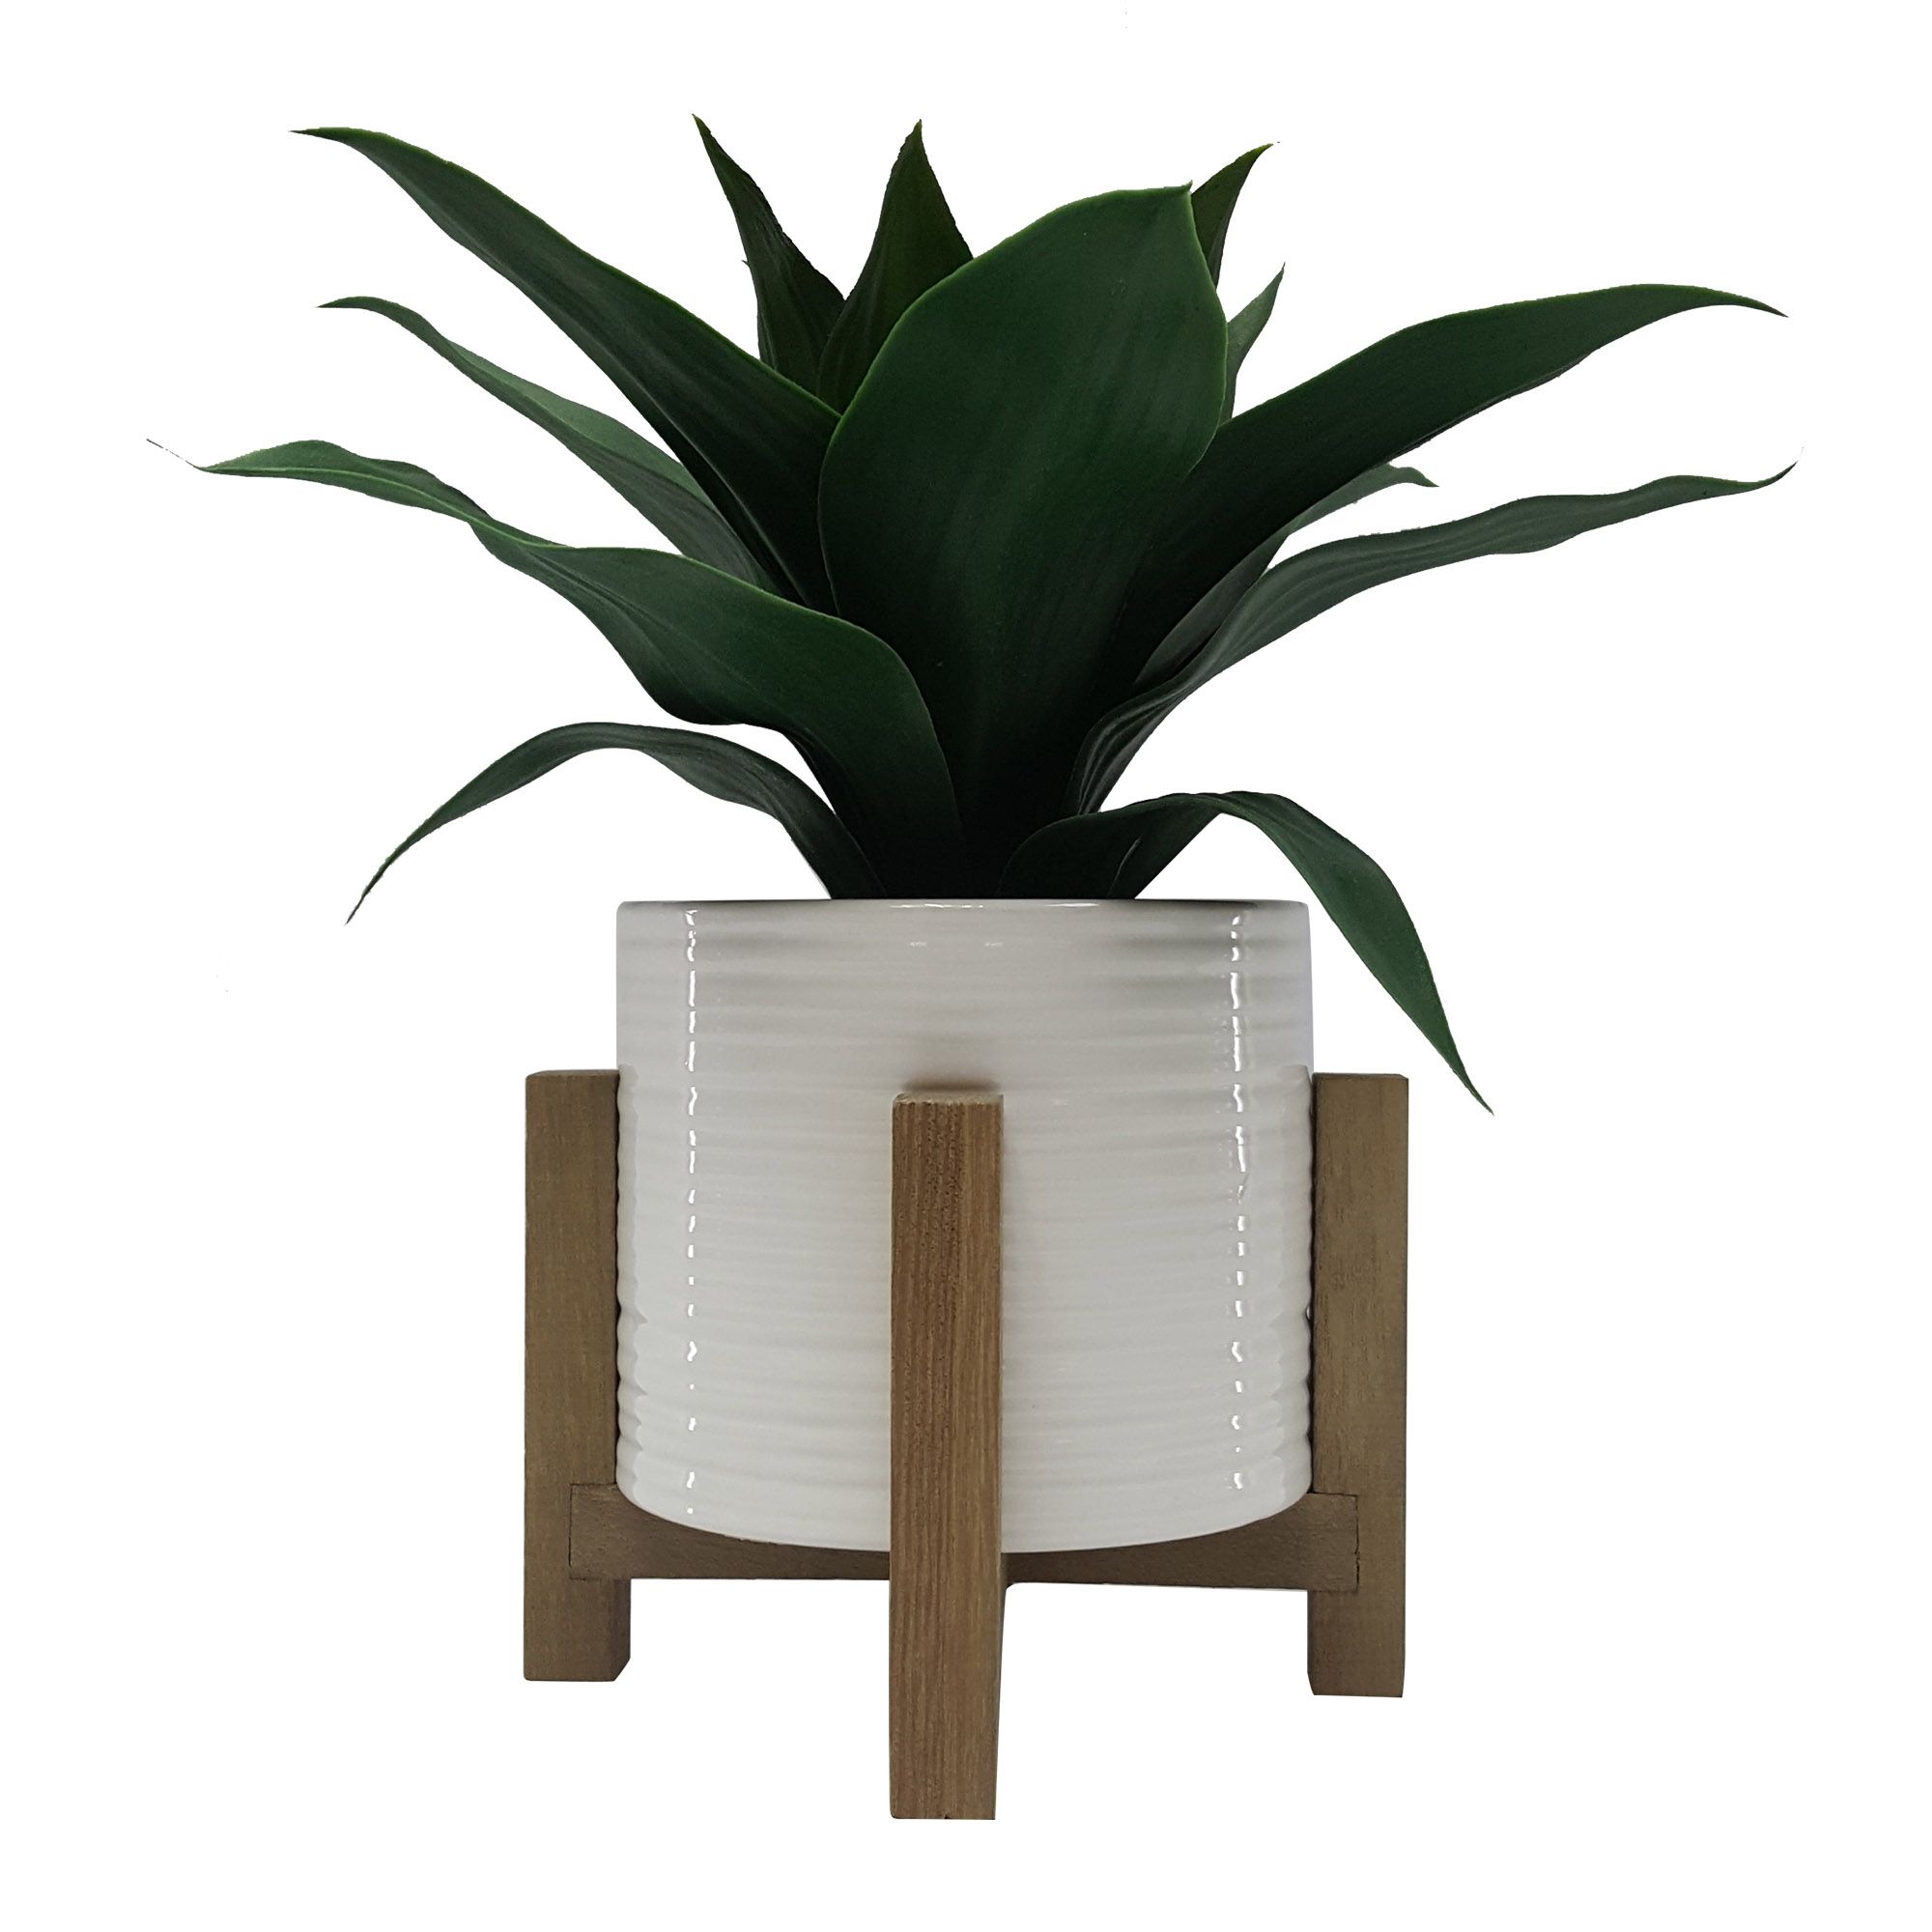 Better Homes & Gardens 10" Artificial Agave Plant in White Ceramic Pot with Wood Stand - image 5 of 7